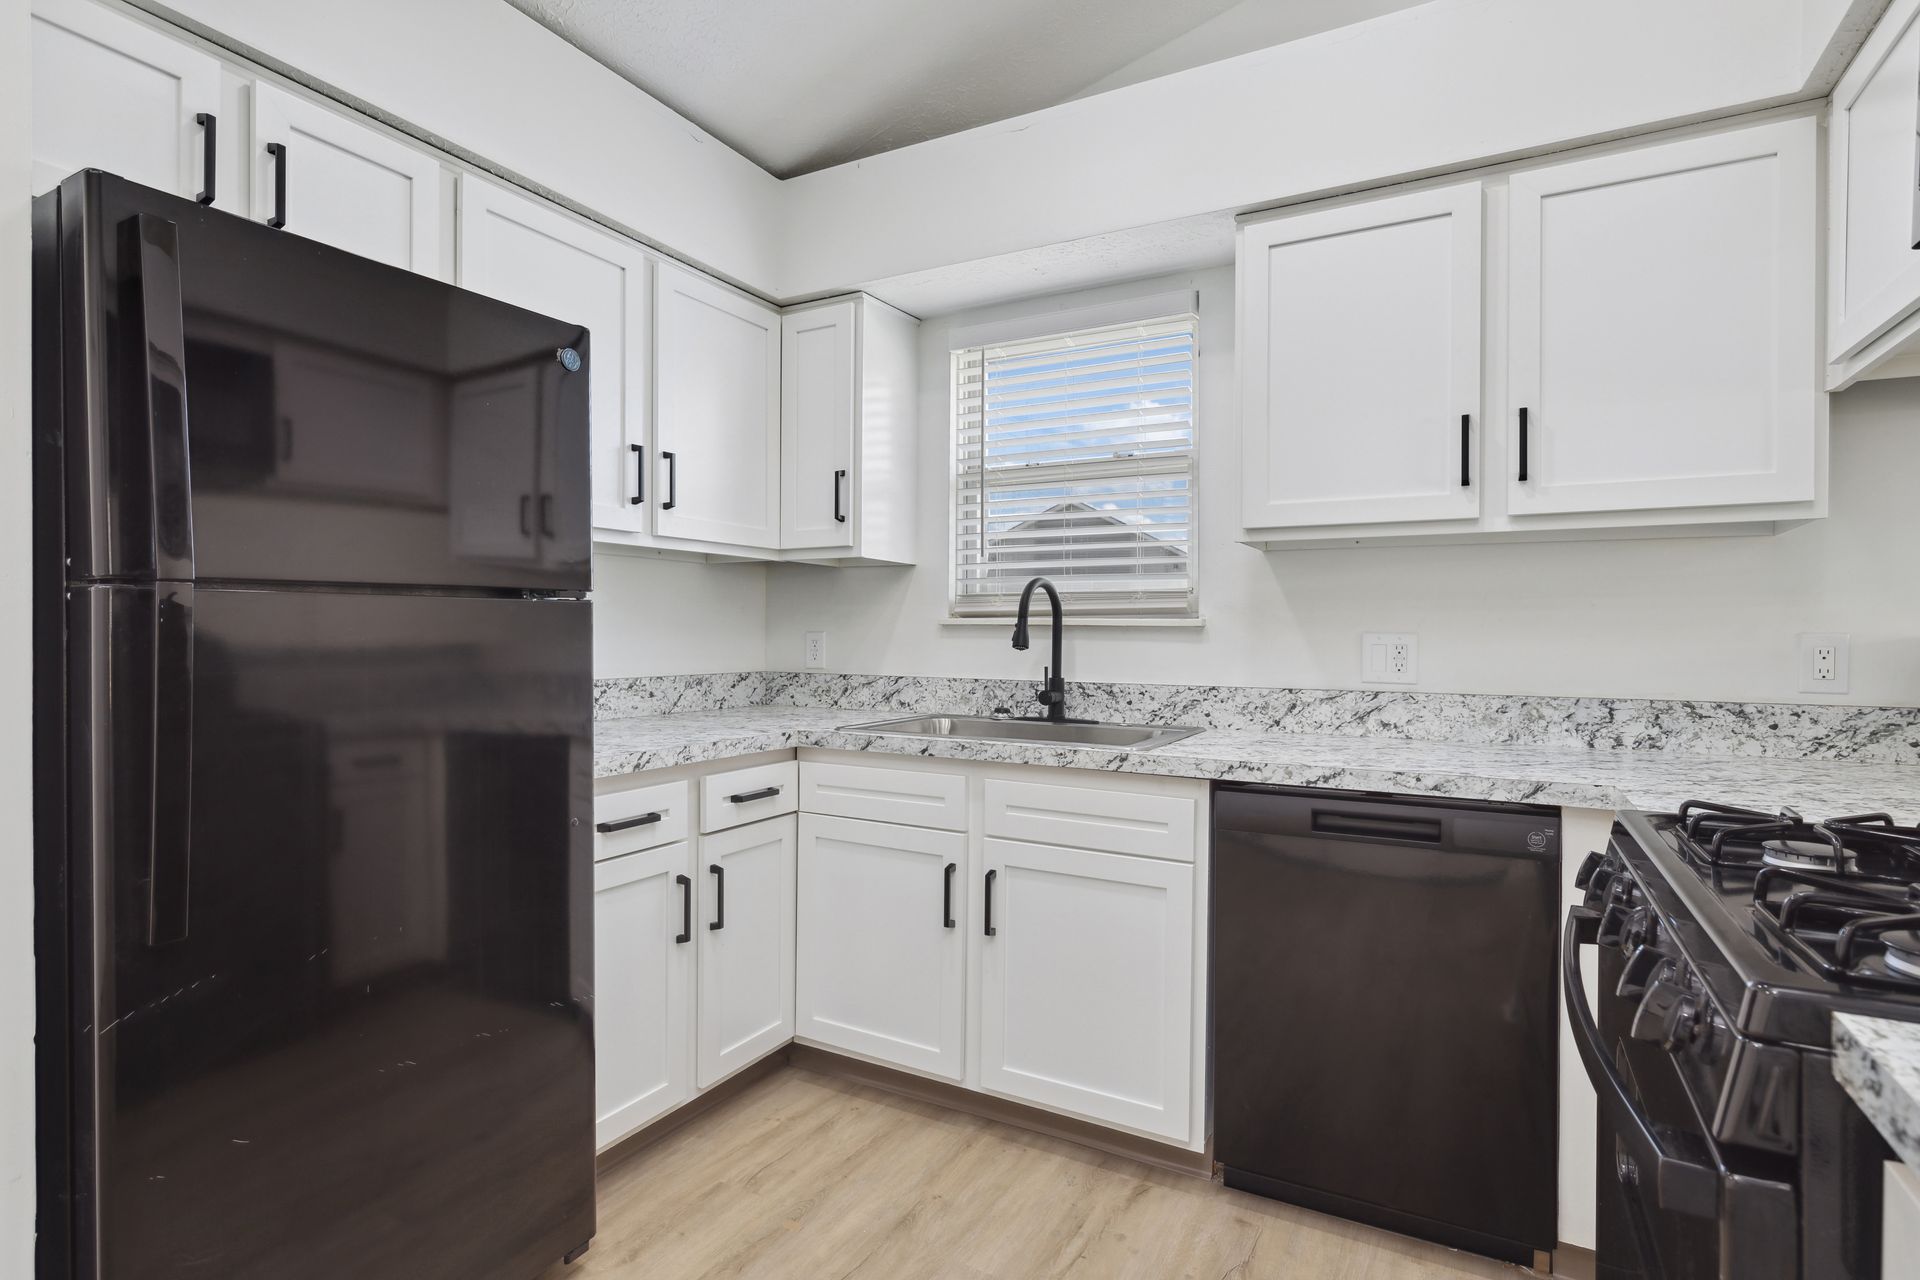 A kitchen with white cabinets , black appliances and a black refrigerator.